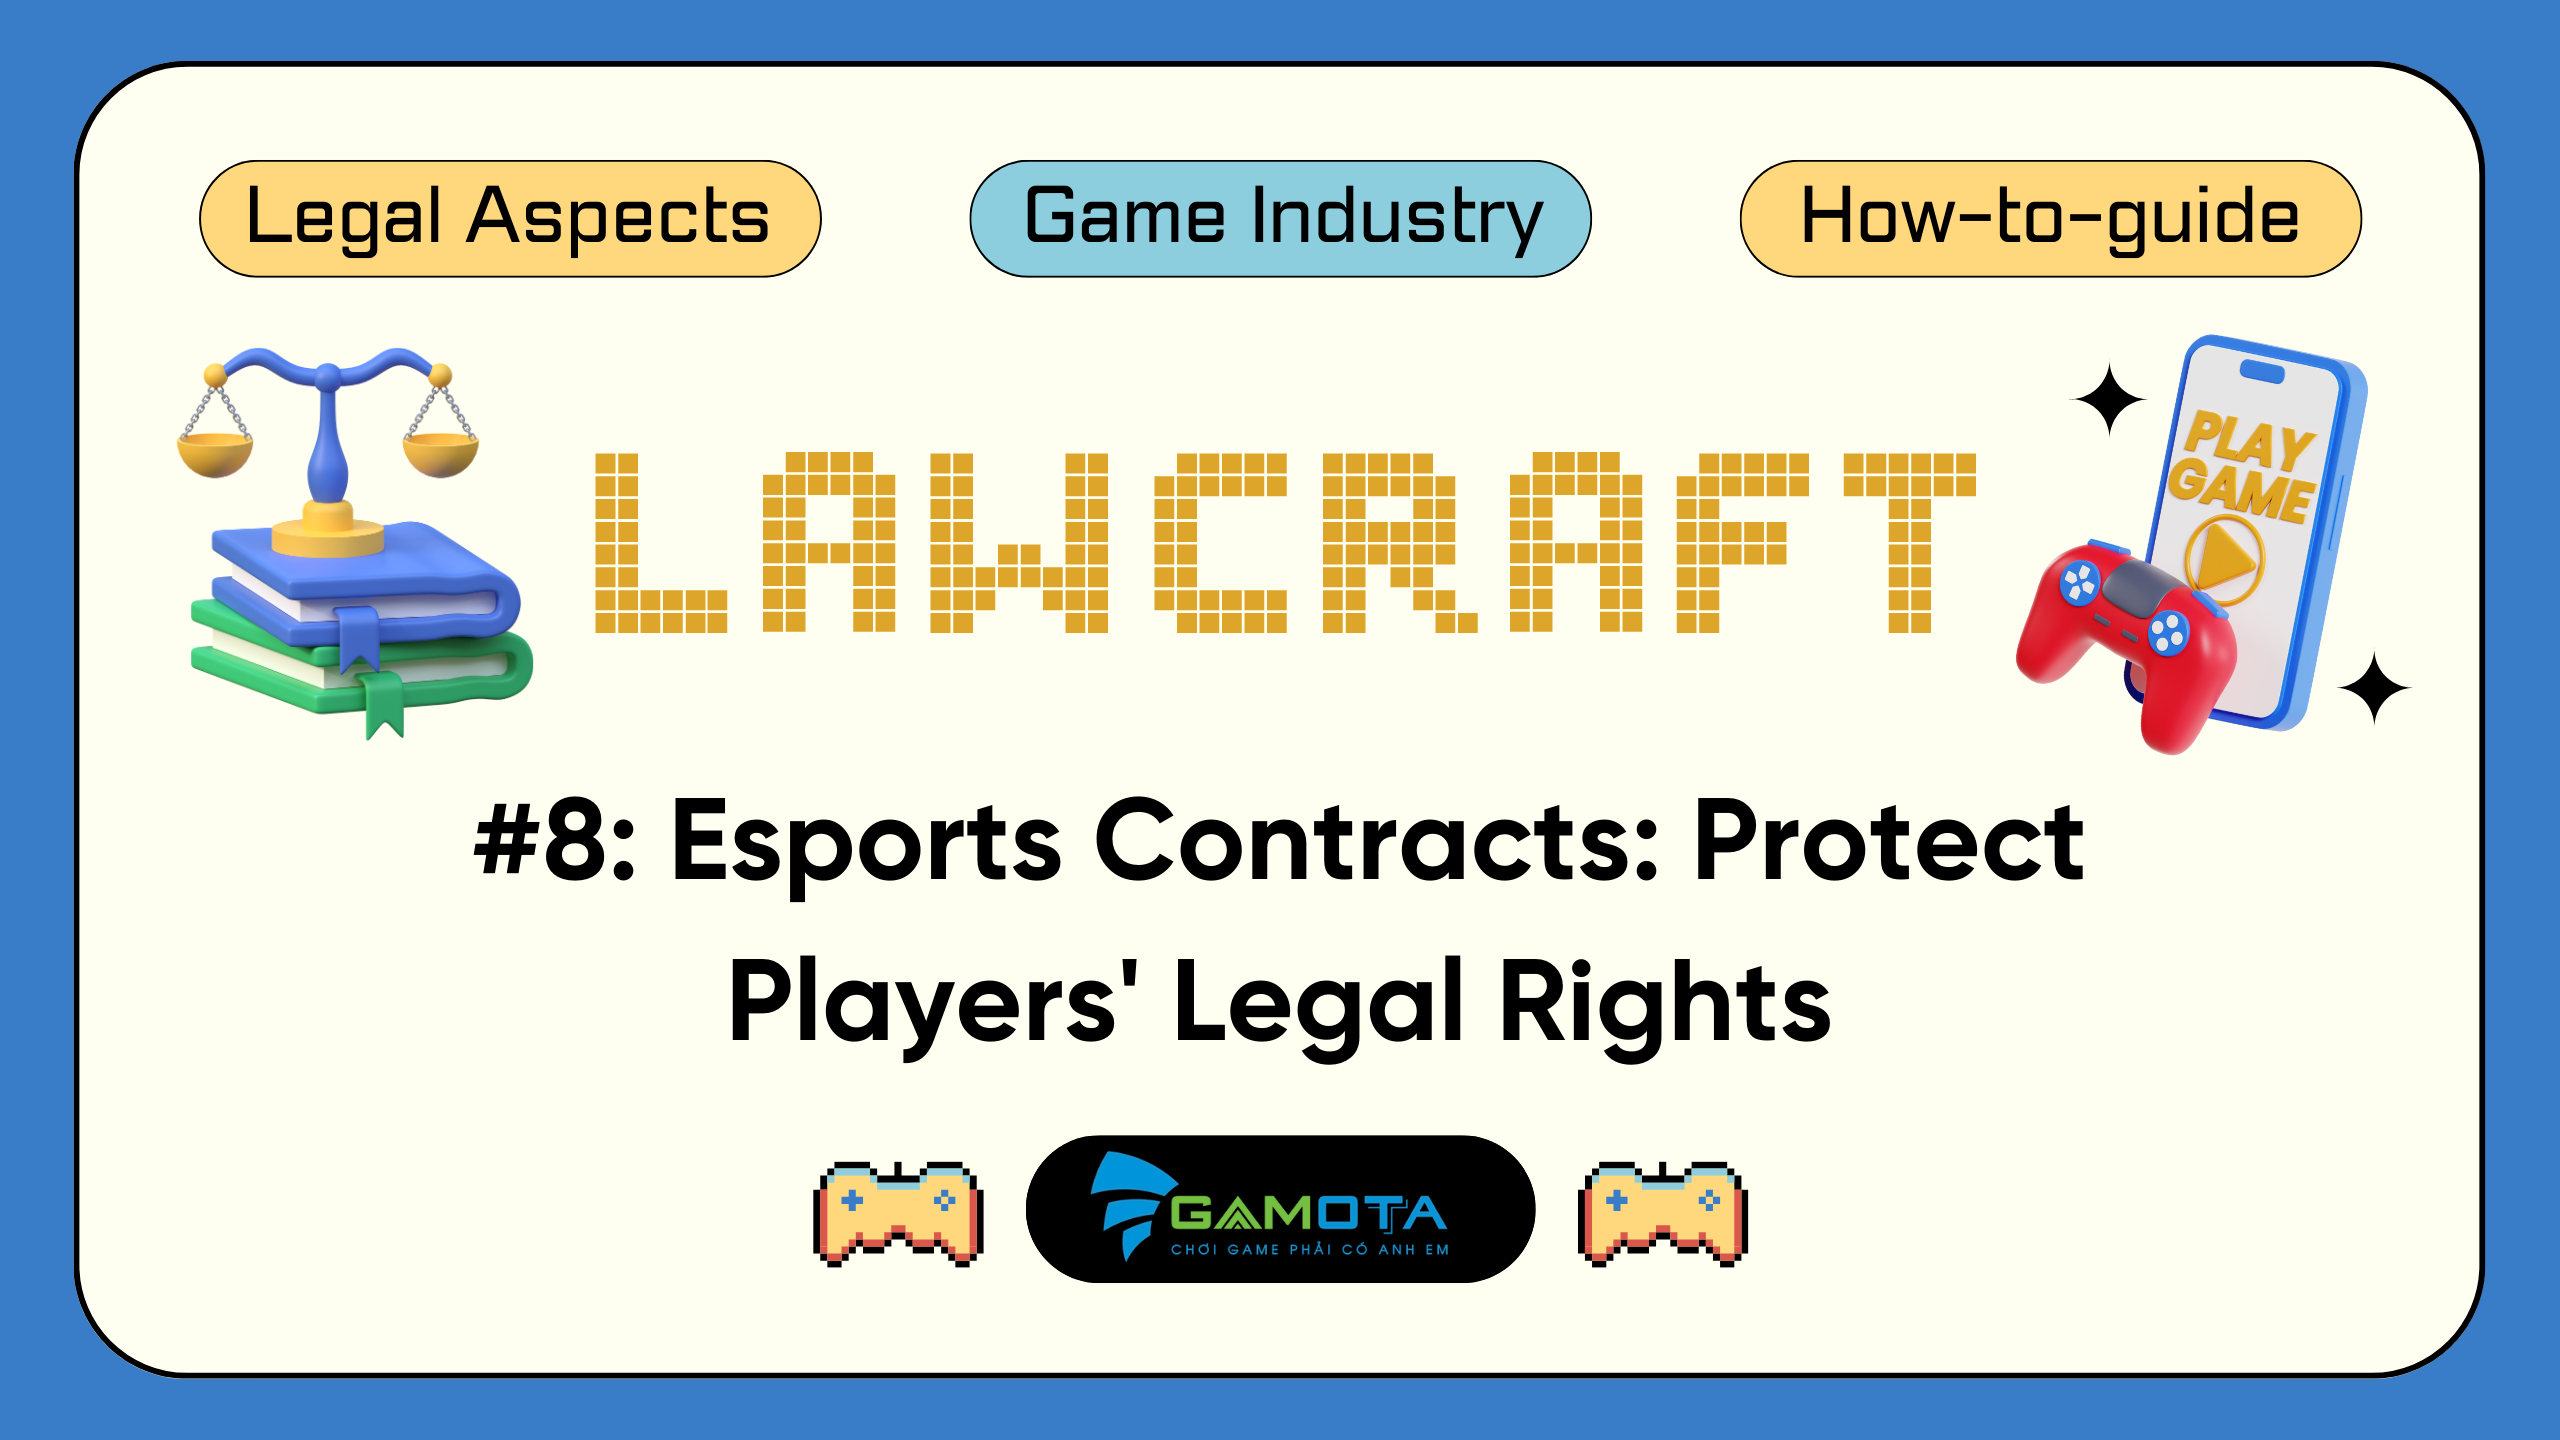 Esports Contracts: Protect Players’ Legal Rights